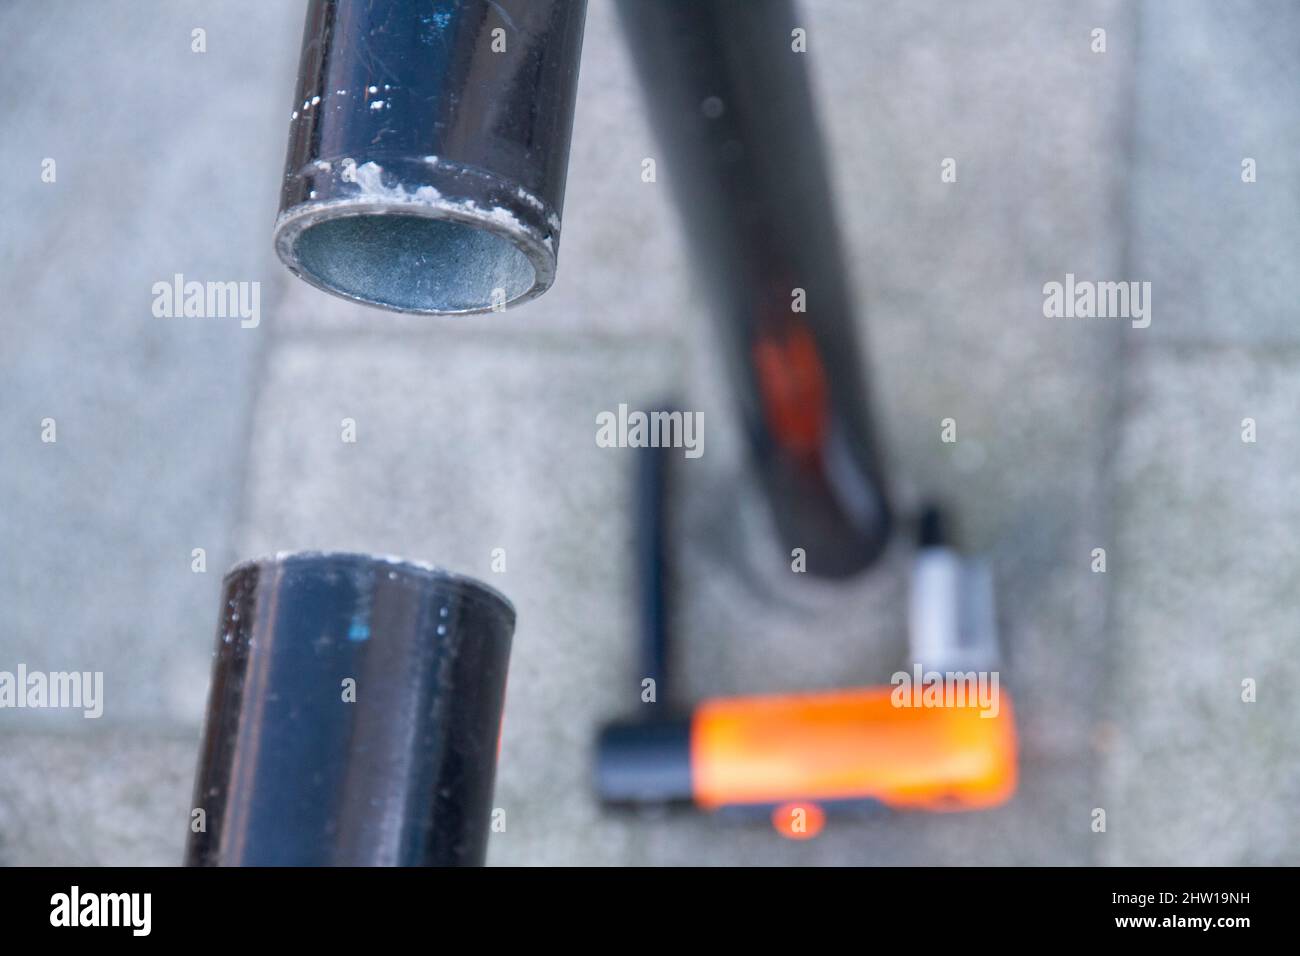 Close-up of a bicycle stand that has been cut through to enable theft. Shows a broken D-lock out of focus on the ground Stock Photo